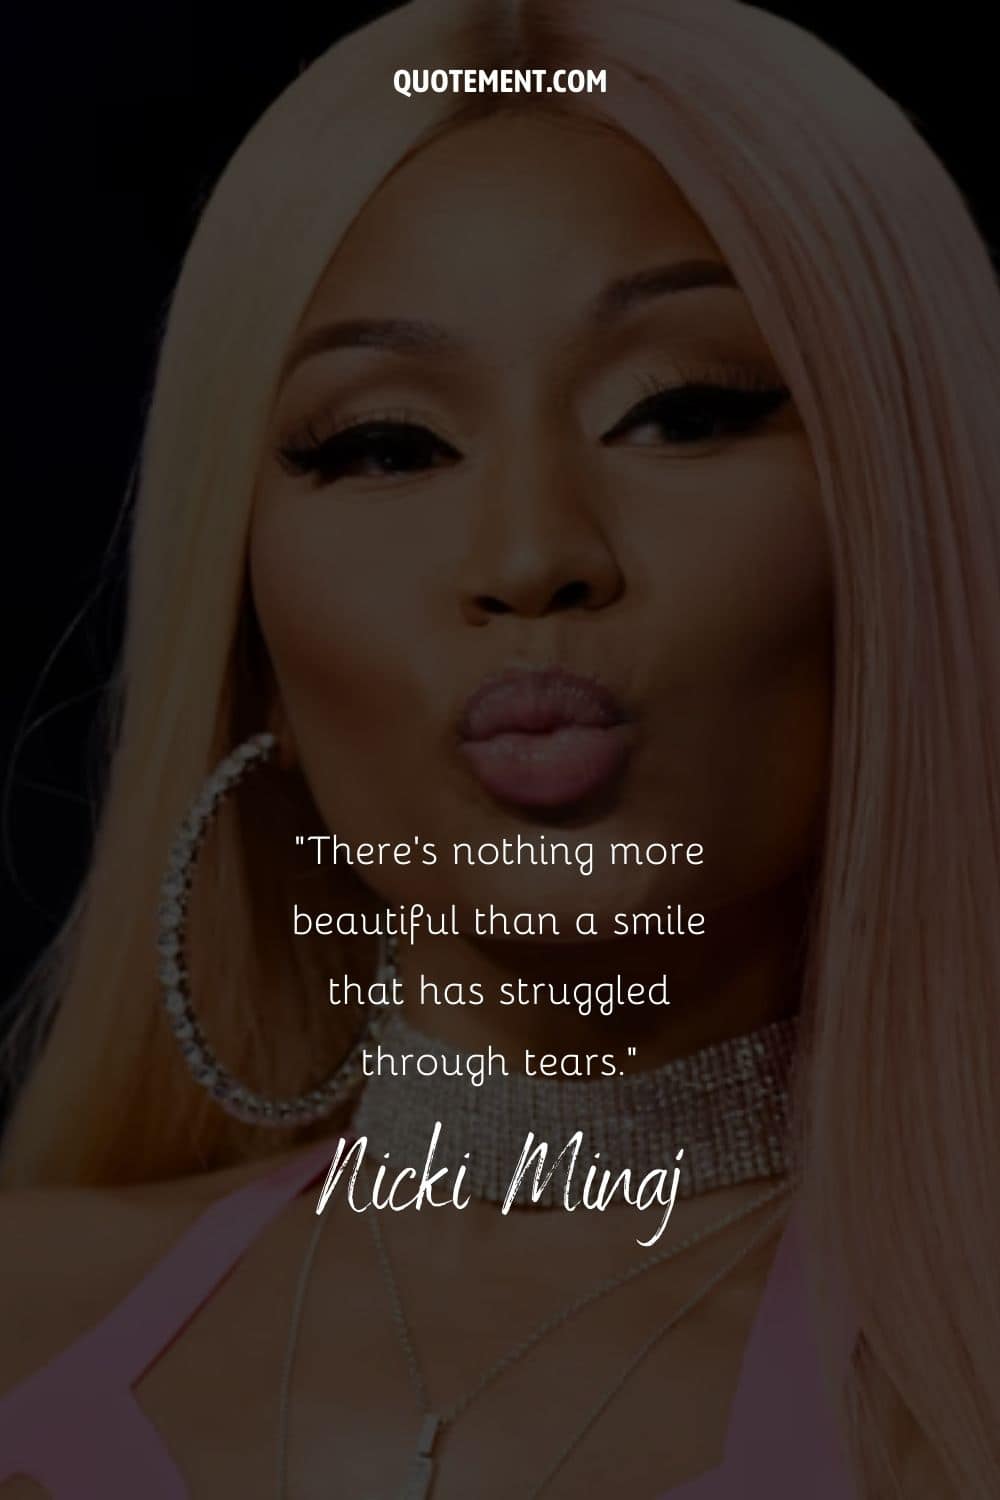 Nicki Minaj quote and her portrait in the background